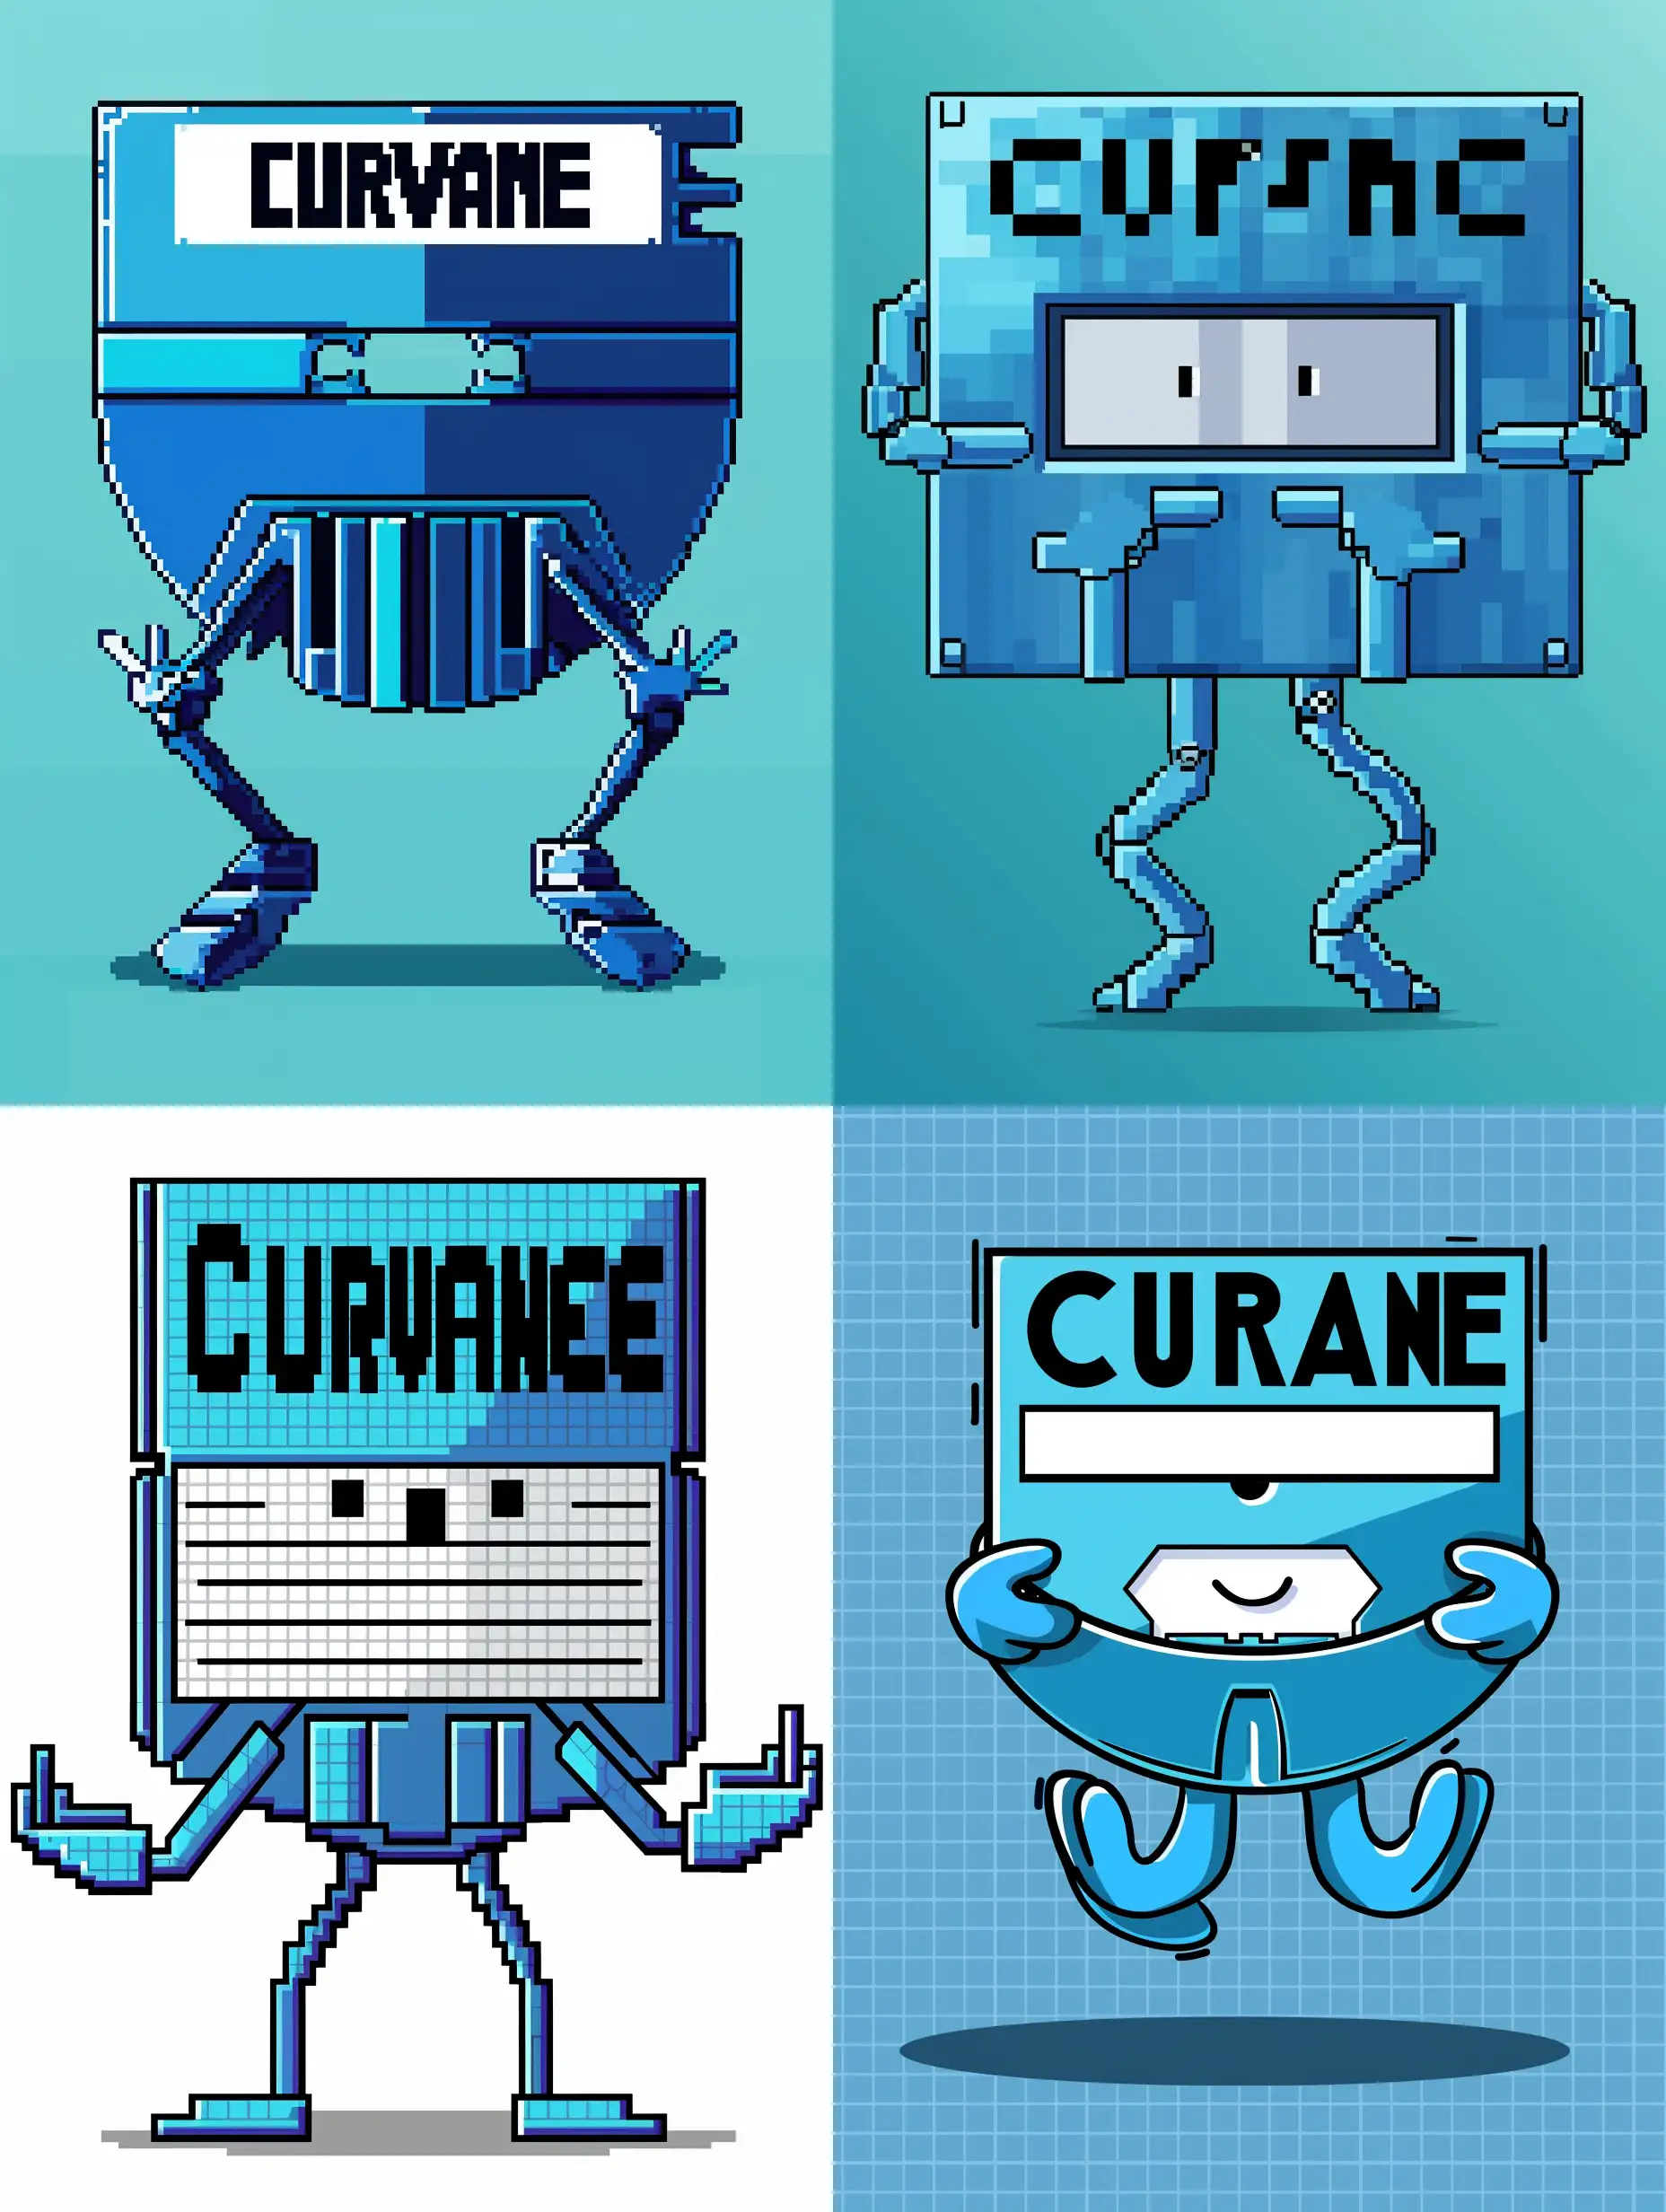 "Generate a cheerful pixel art illustration of a personified floppy disk characterized by cartoonish hands and legs, featuring blue color tones. Incorporate the word "Curvance" with bold and black style arranged on the label in a clear font. The first part of the word "CUR" will be on the top, and the second part of the word "VANCE" will be on the bottom. Ensure the overall design exudes a minimalist and pixelated aesthetic."